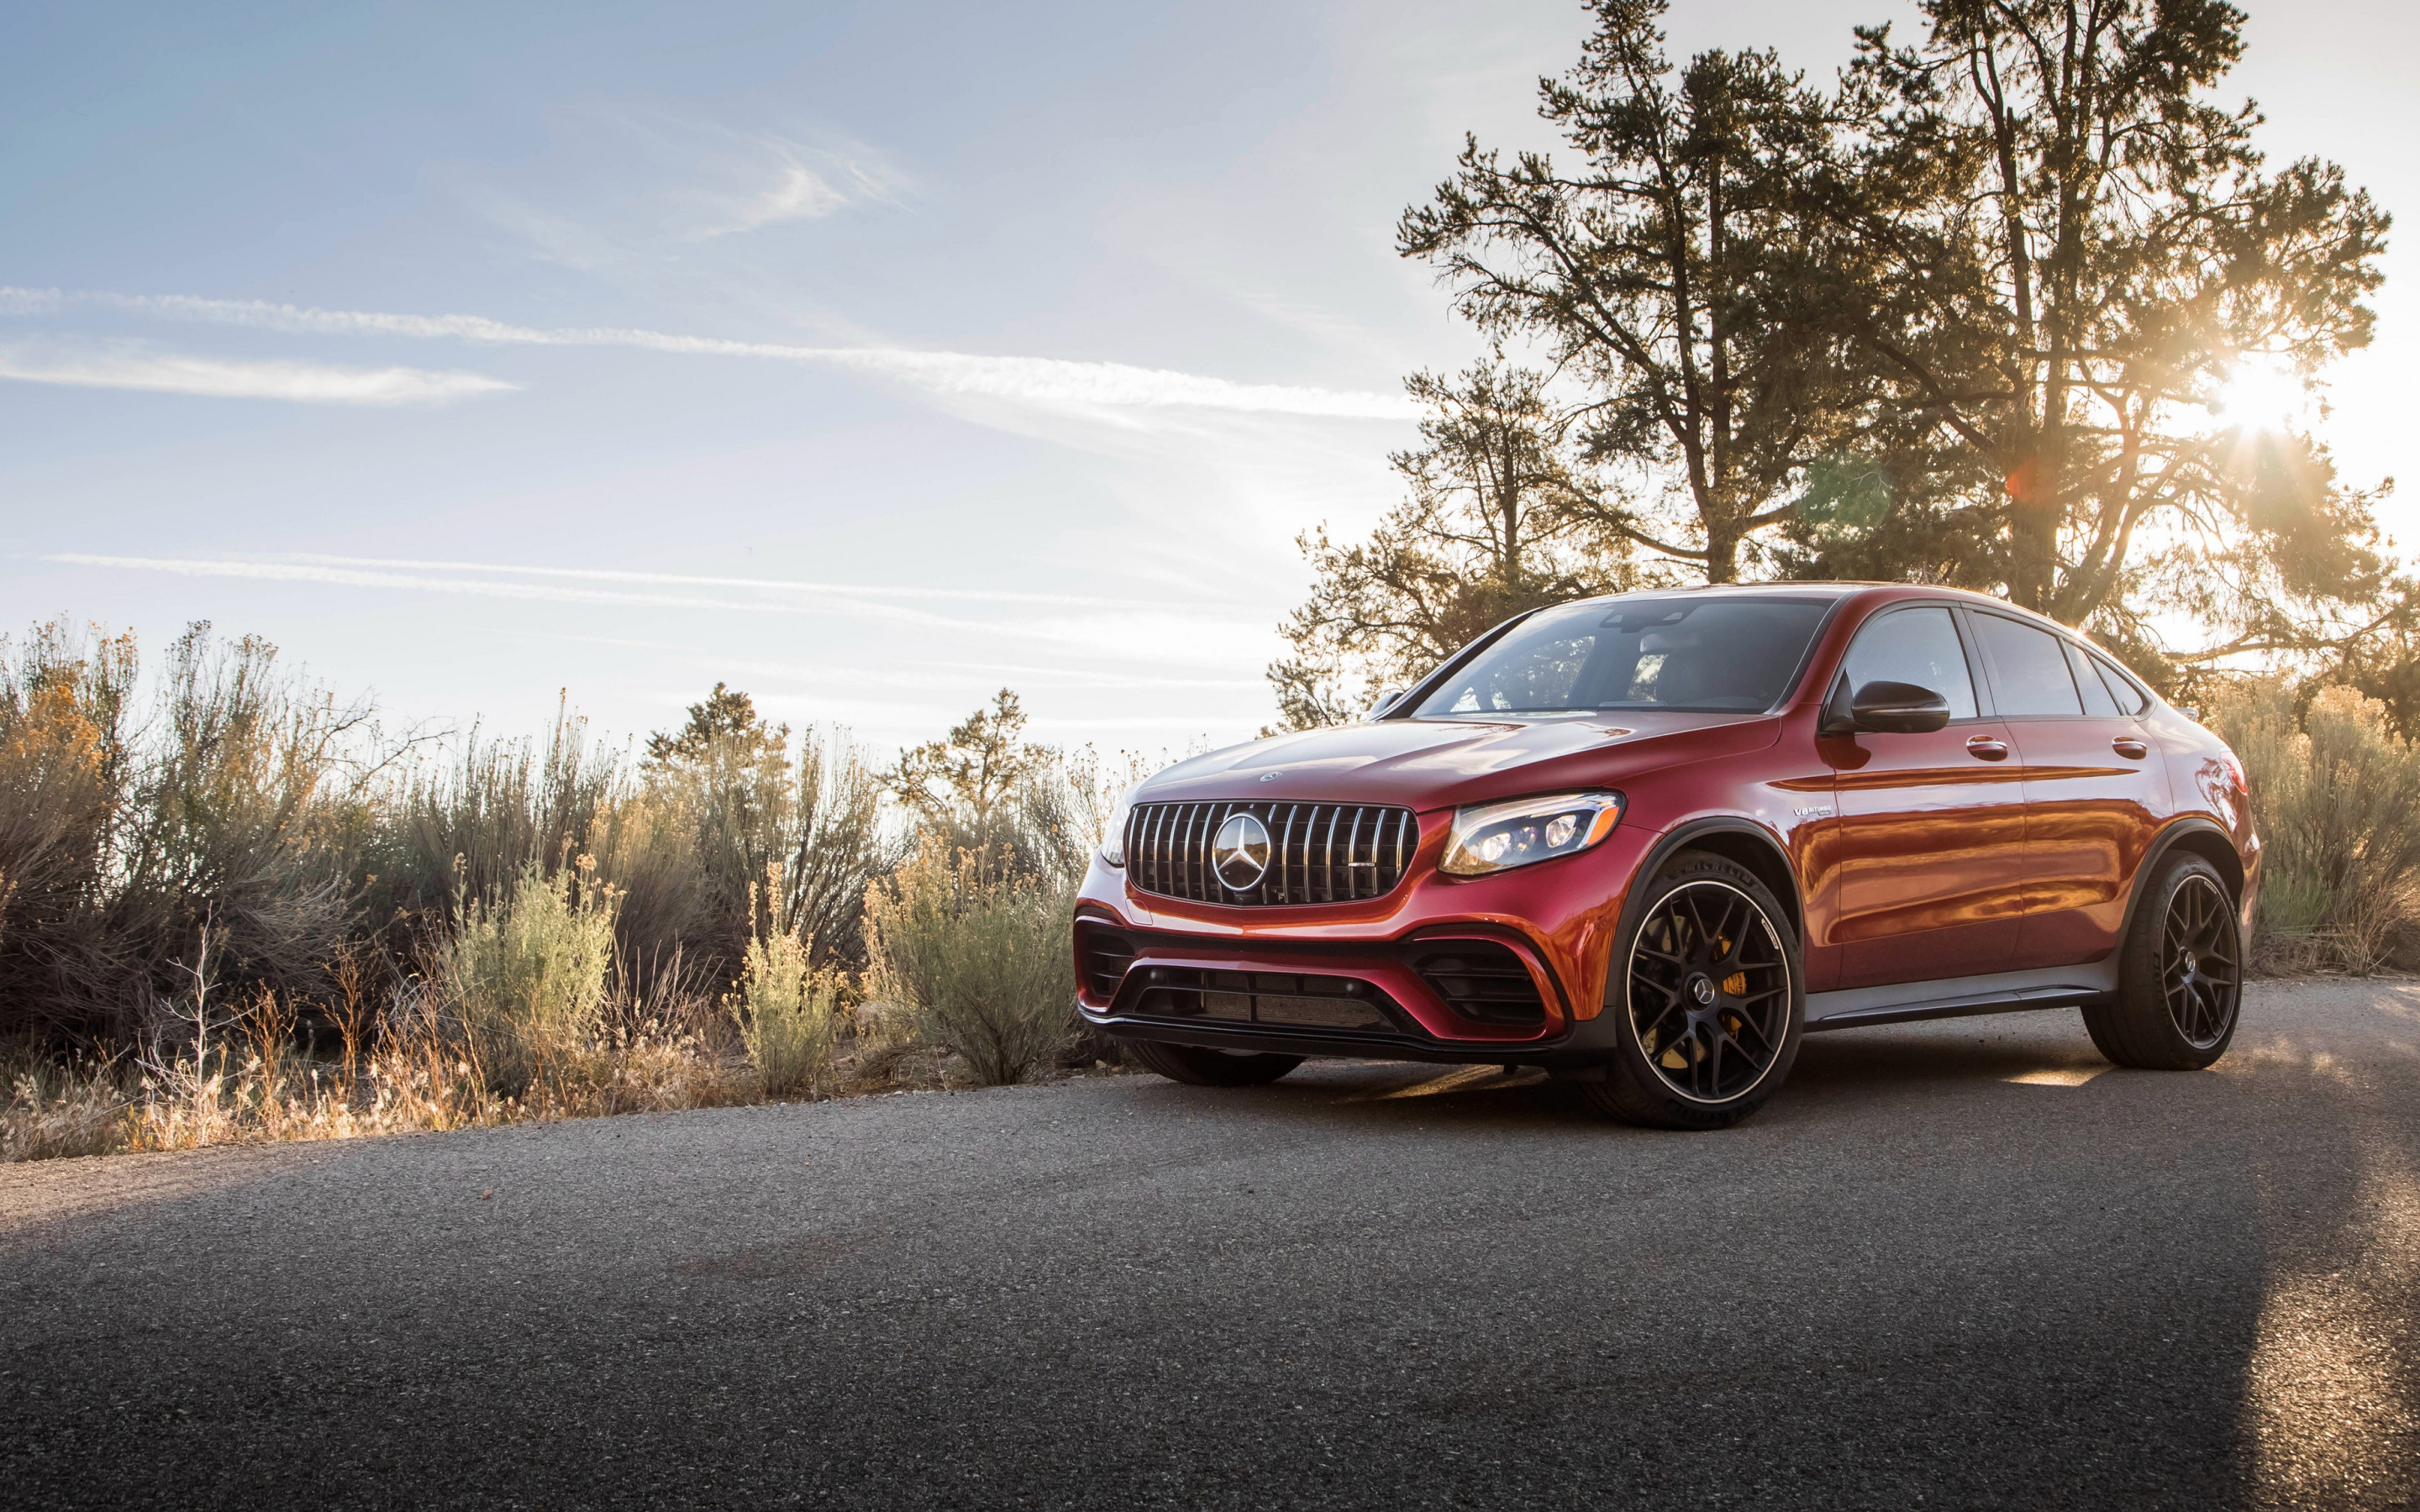 Mercedes-Benz GLC, Coupe 63s AMG 4Matic, High-quality HD pictures, New red GLC, 2880x1800 HD Desktop